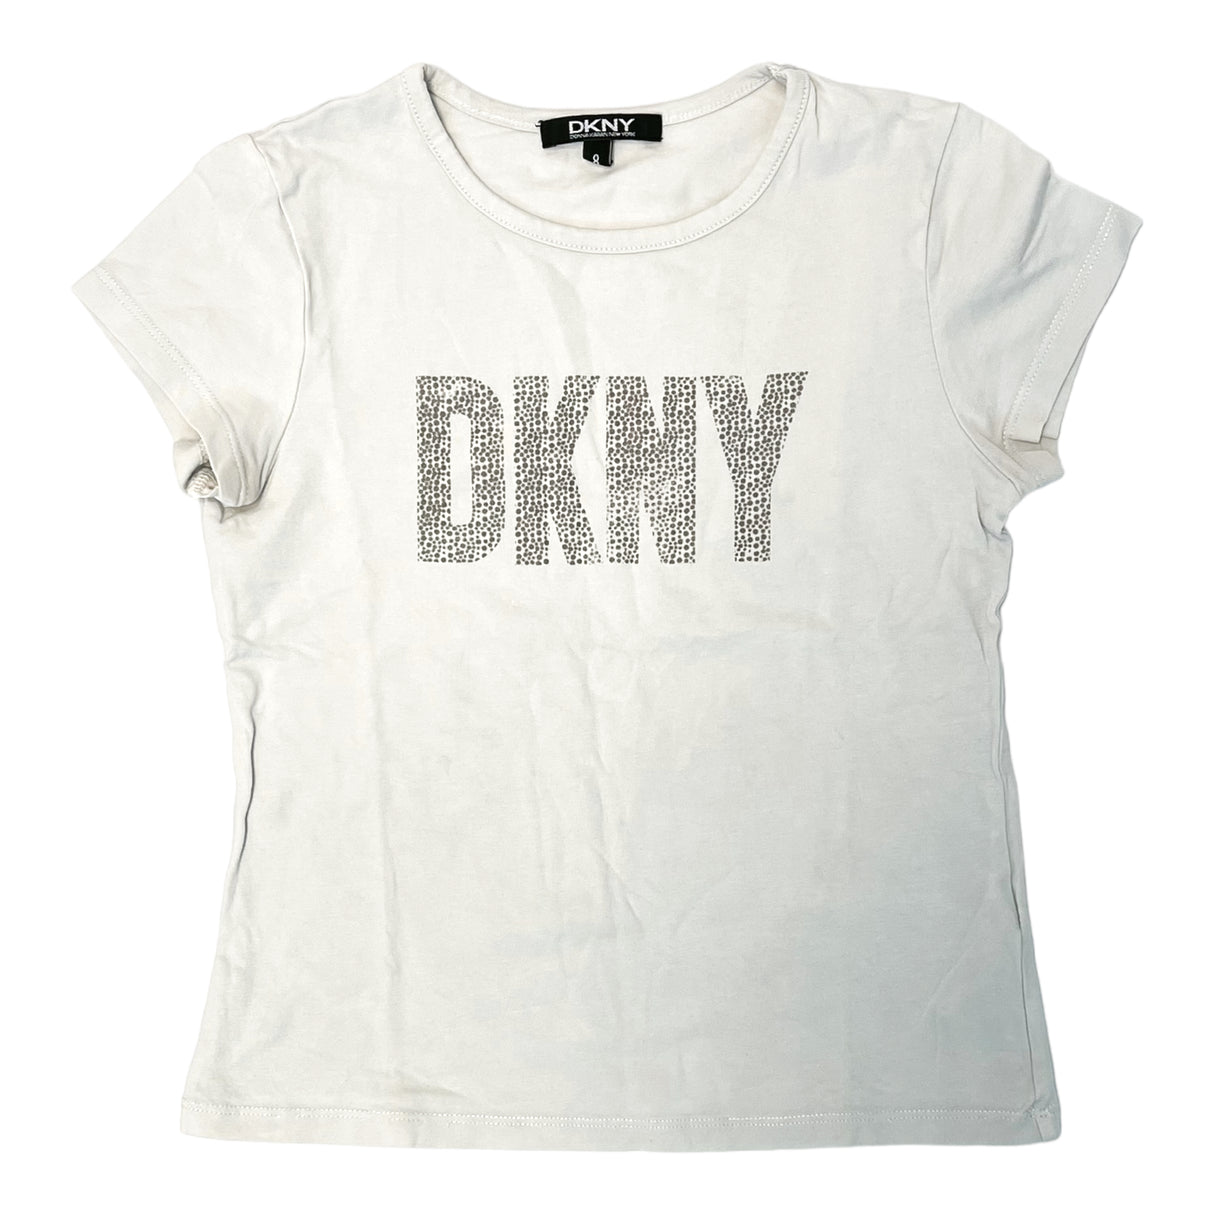 A Second Chance - DKNY 8 Shirt Kids - Delivery All OVer Lebanon